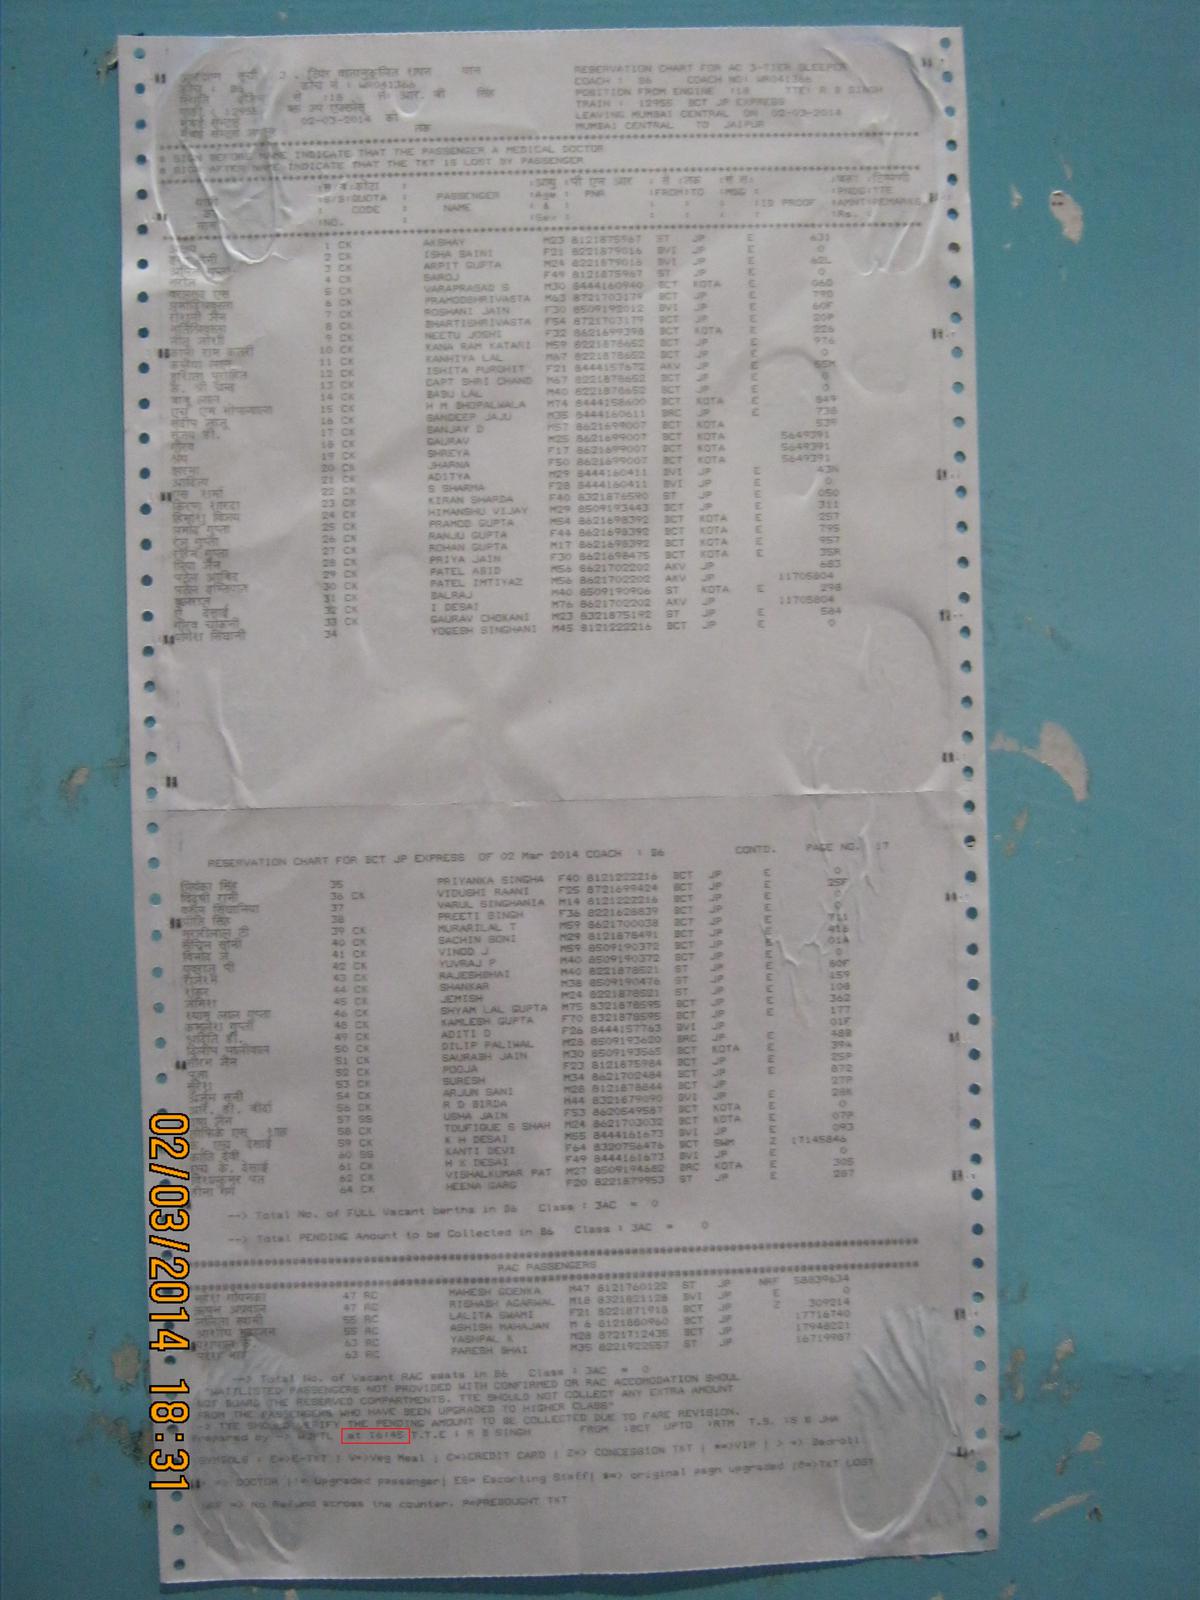 Indian Railway Reservation Chart Preparation Time